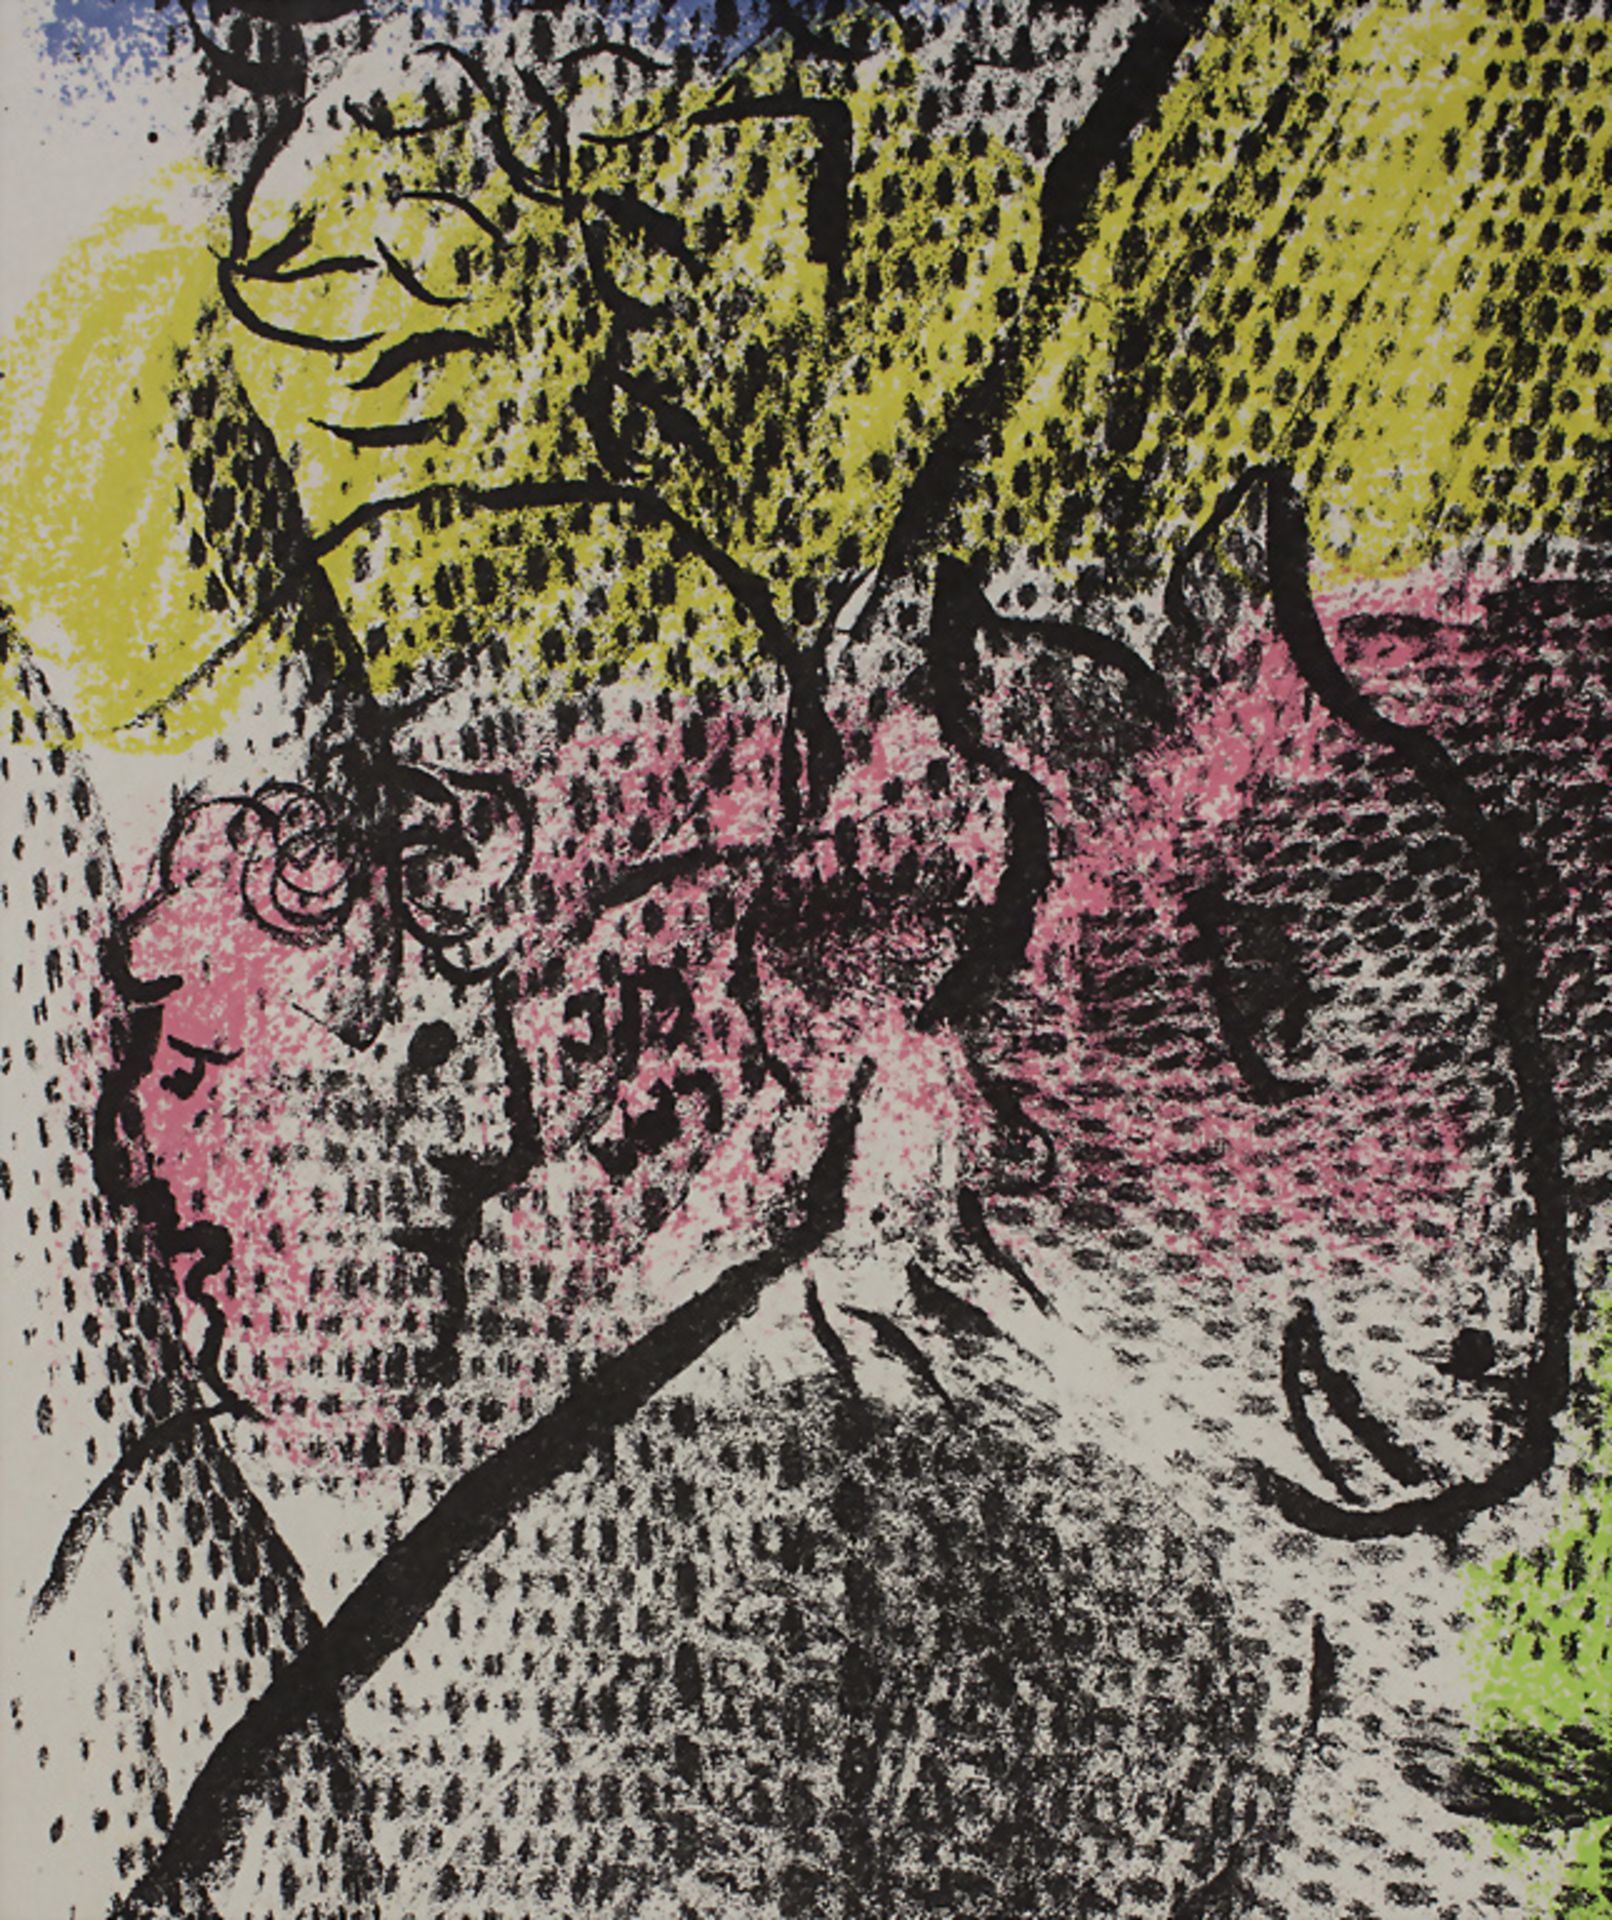 Marc Chagall (1887-1985), 'Frau mit Esel' / 'A woman with a donkey', 1970 - Image 3 of 3